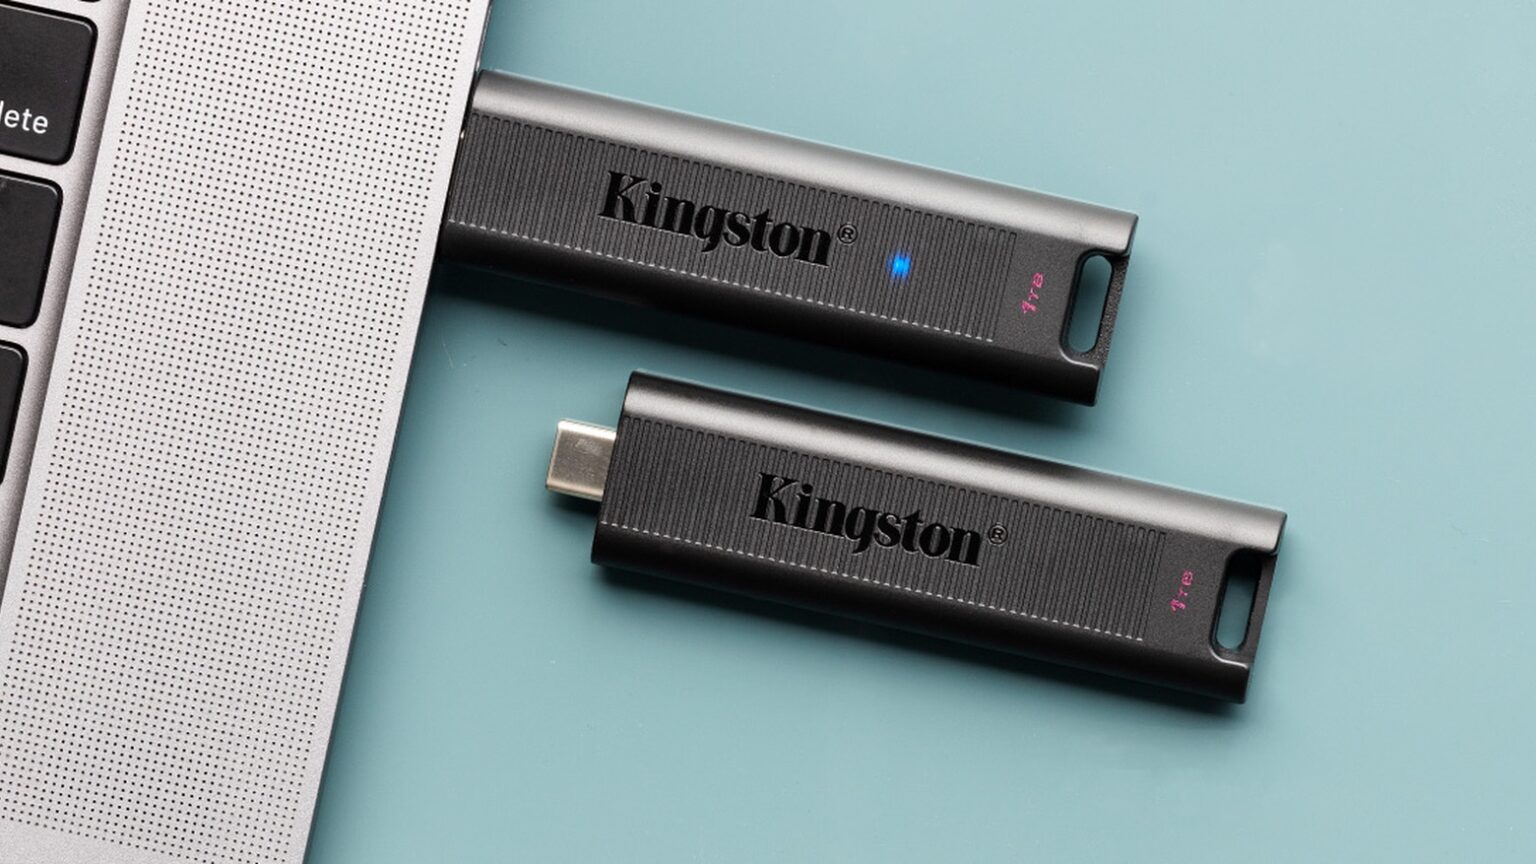 The high-speed Kingston DataTraveler flash drive comes in sizes up to 1TB.